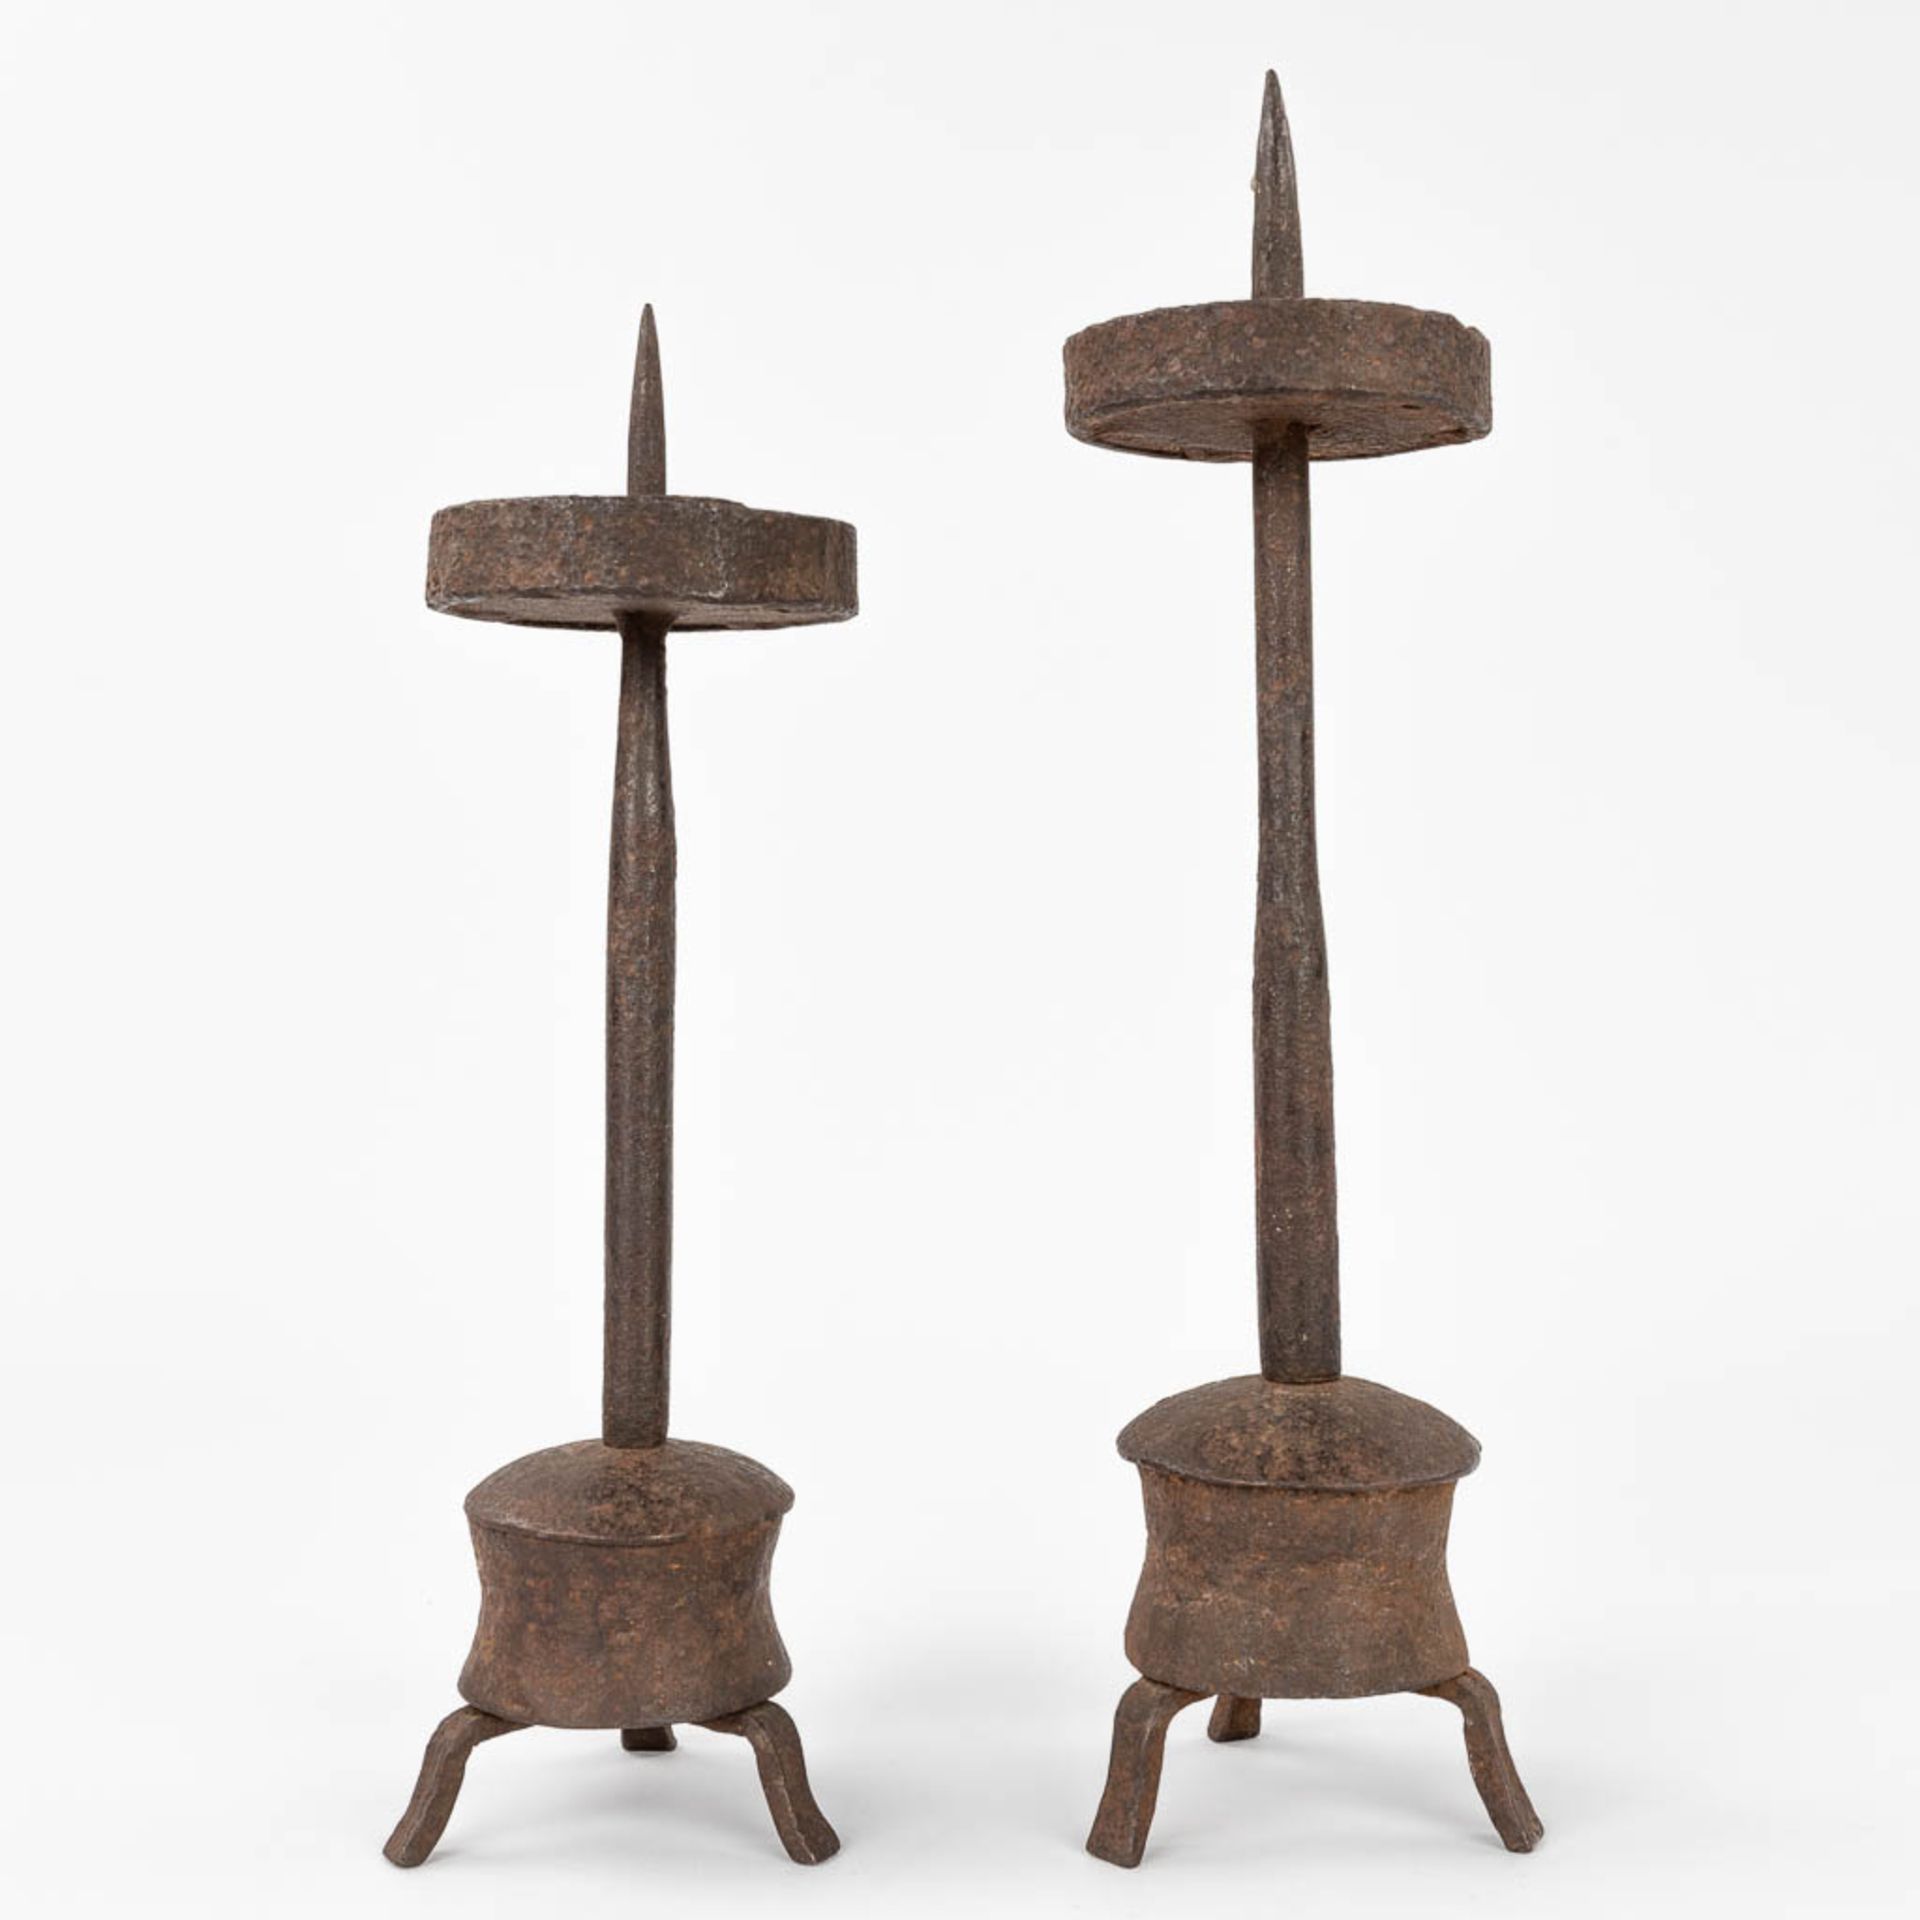 A pair of antique candlesticks made of wrought iron. Probably made in Southern Europe. (H:34 cm) - Image 5 of 16